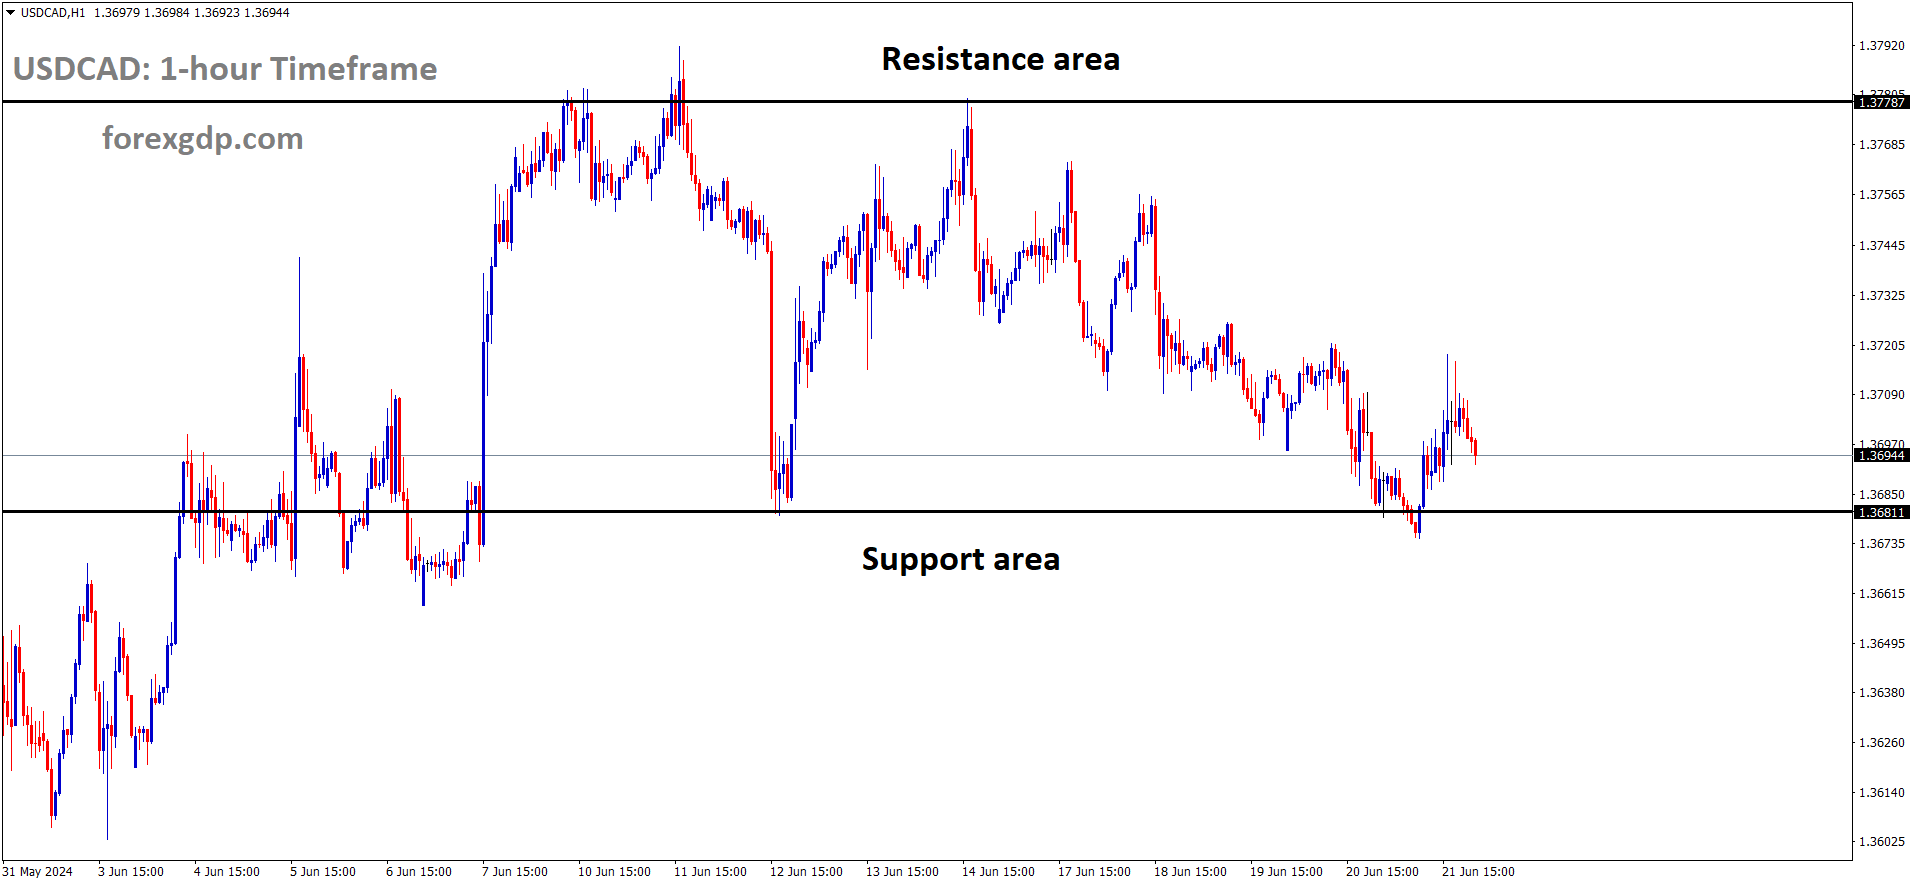 USDCAD is moving in box pattern and market has rebounded from the support area of the pattern